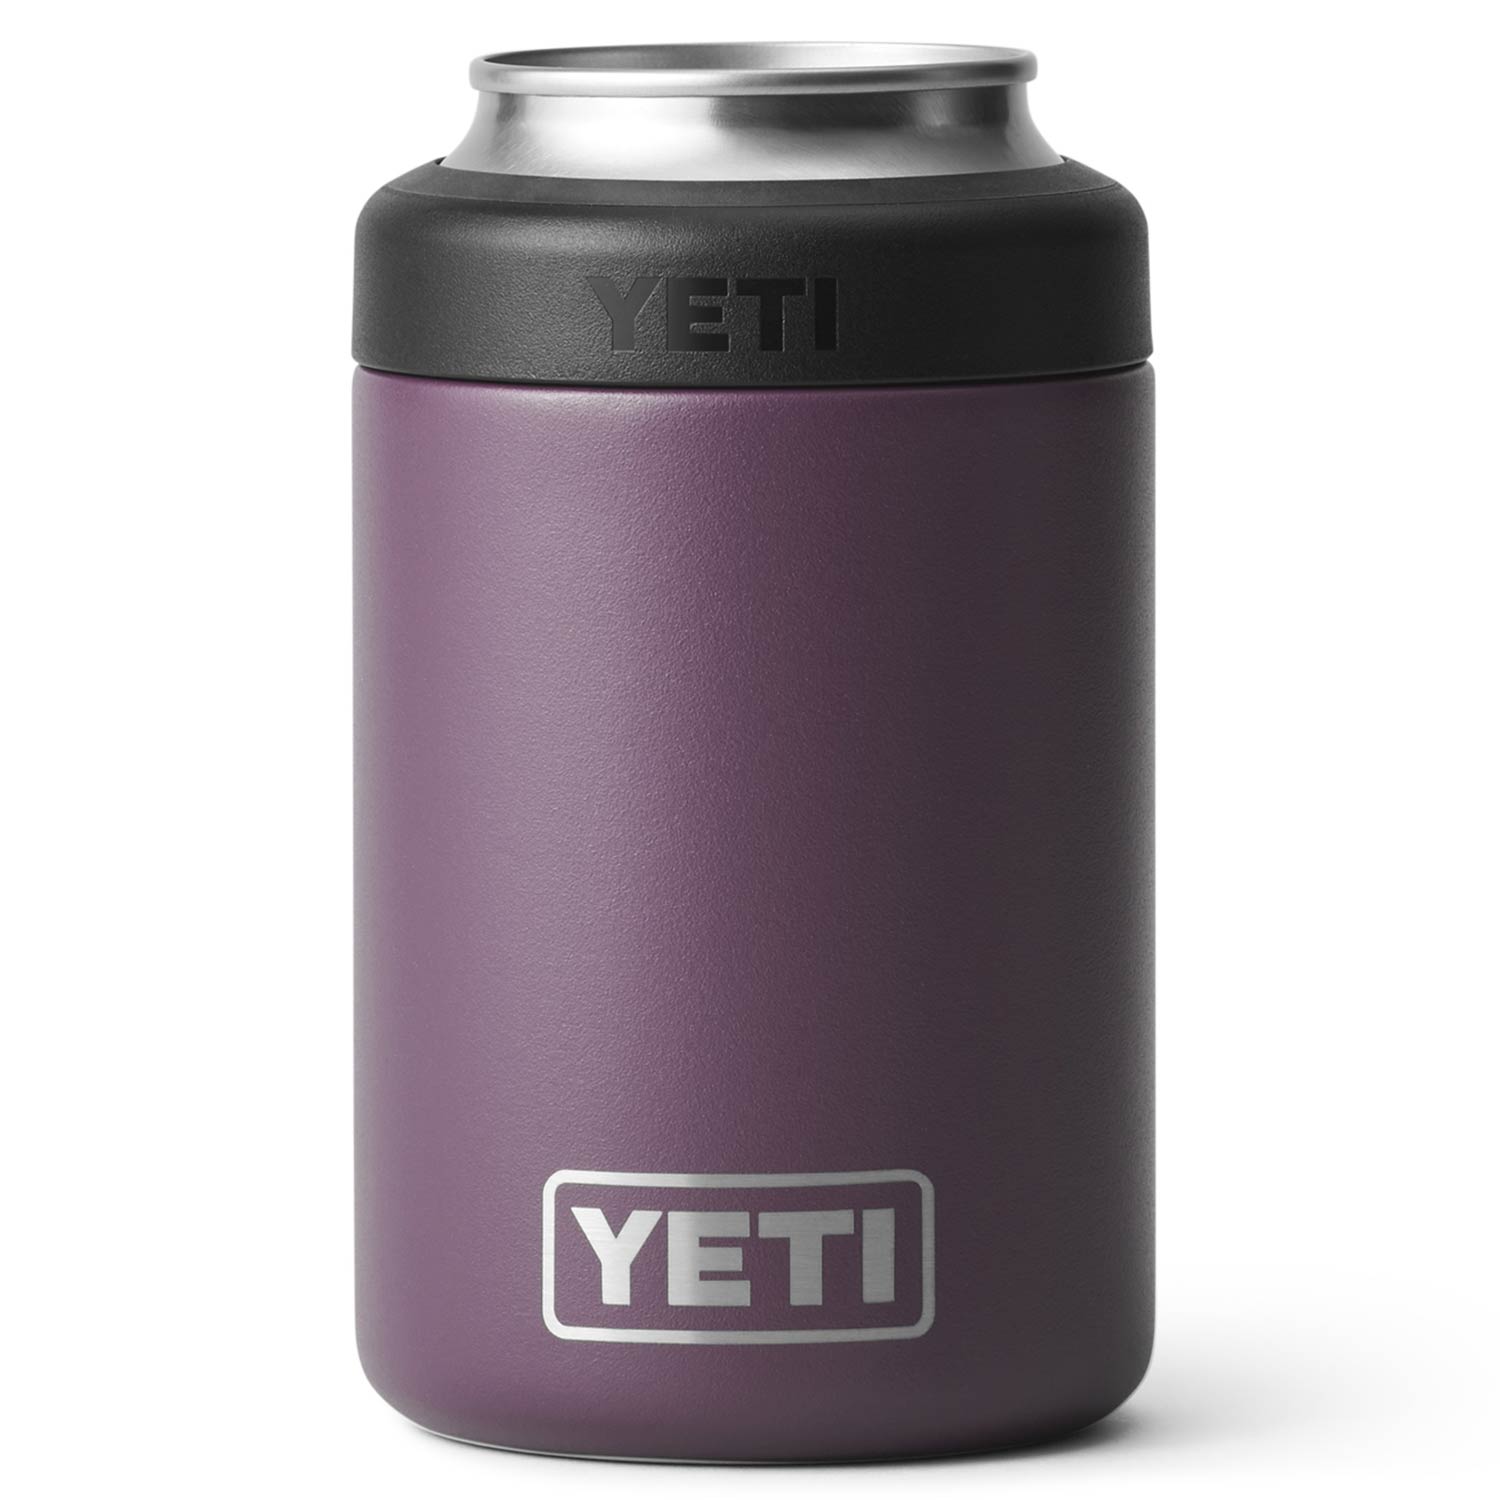 Gene Lockwood's - Little Rock - NEW @yeti Bimini Pink and Offshore Blue  ramblers, colsters, and more! 🤩🤩 #shoplocal #shopgenelockwoods #shopsmall  #supportlocal #arkansas #yeti #spring #drinkware #summer #accessories